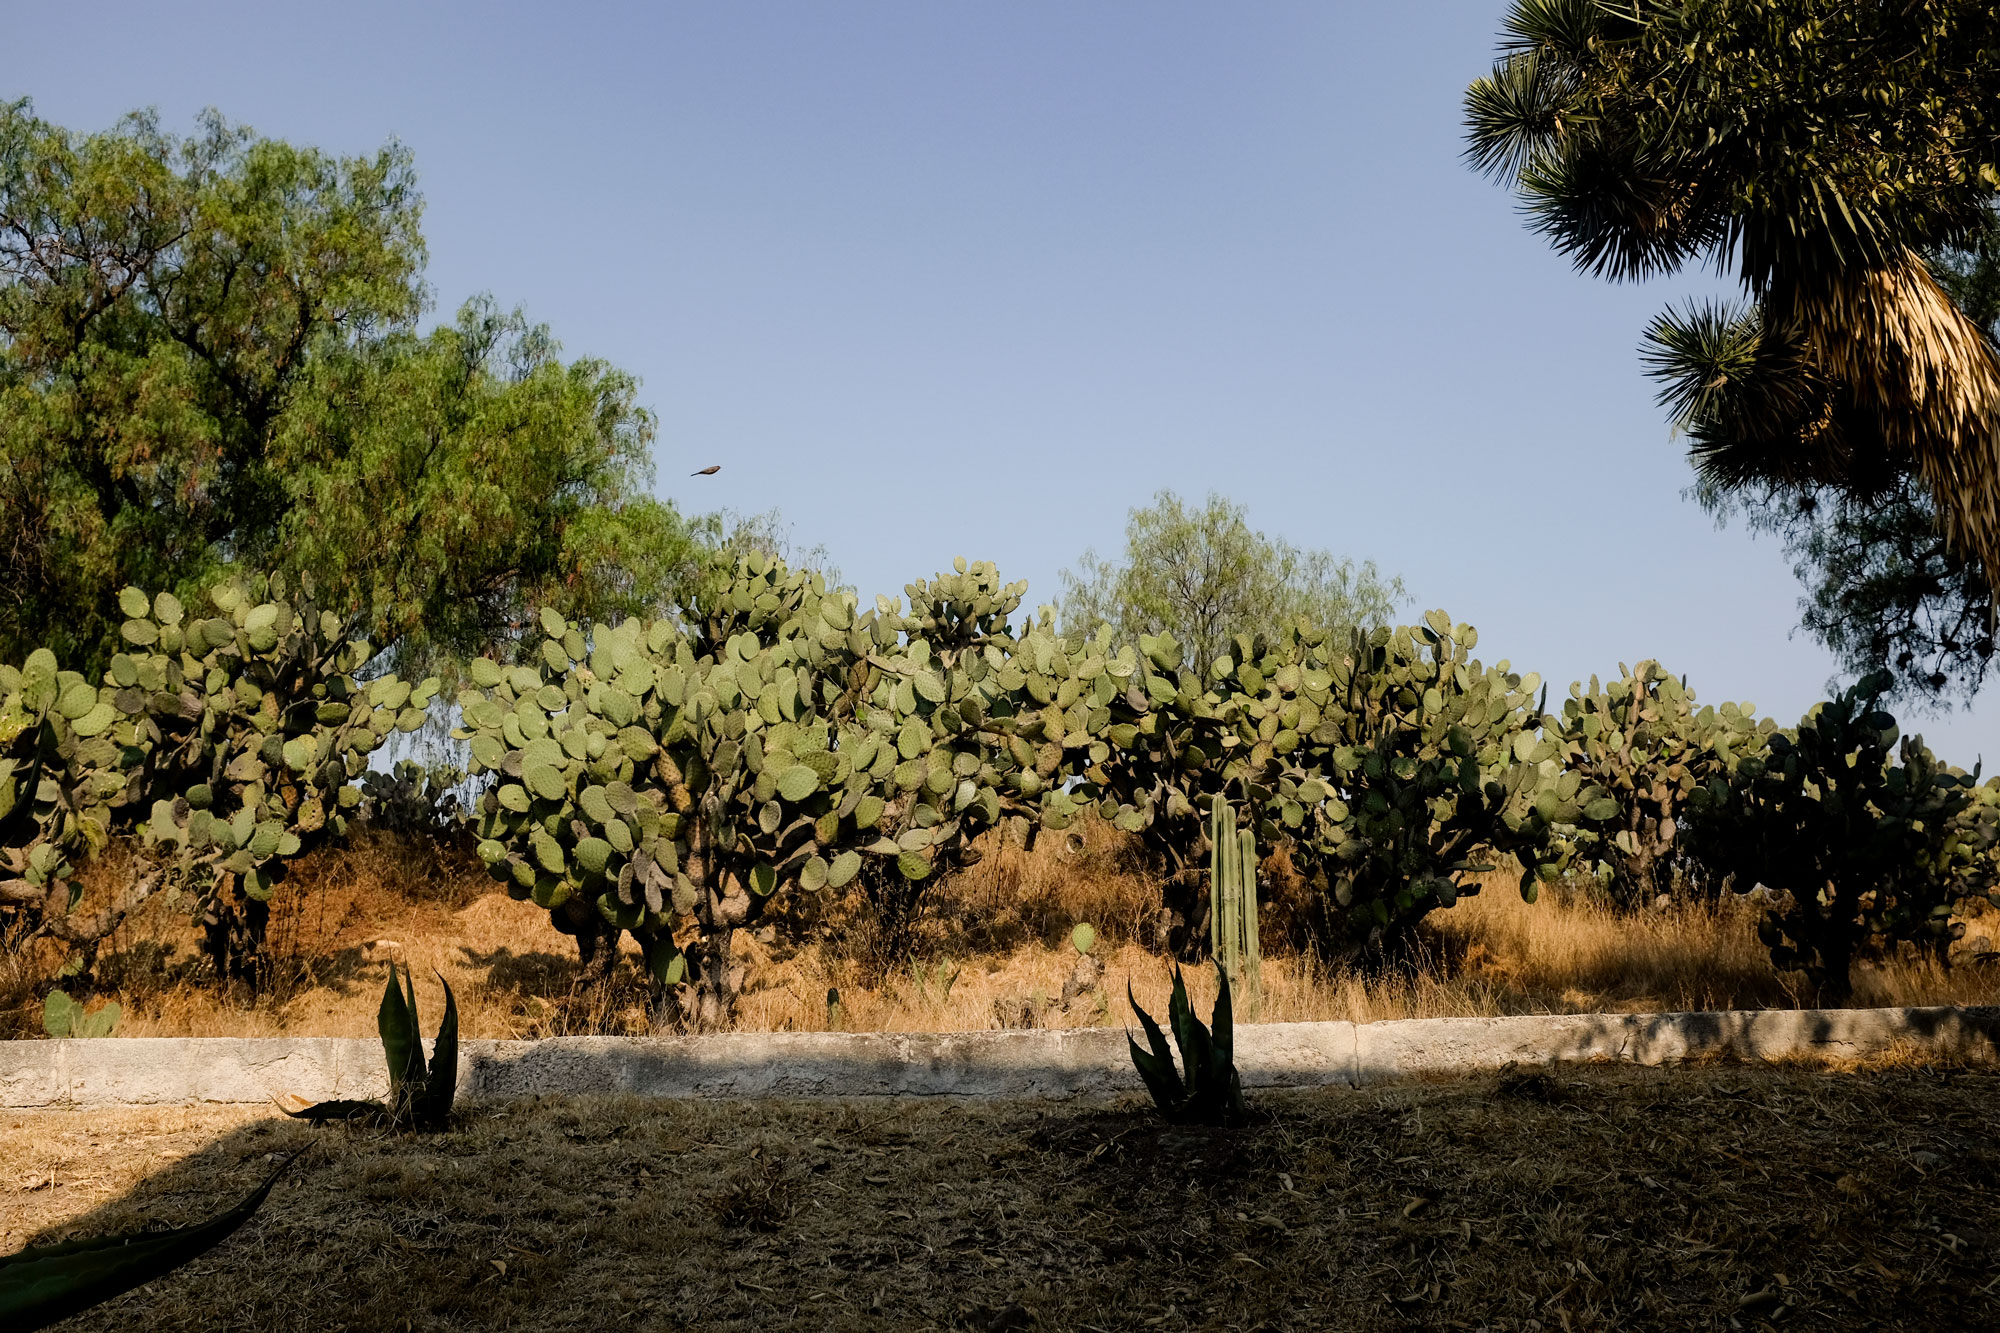 Groups of cacti along a path